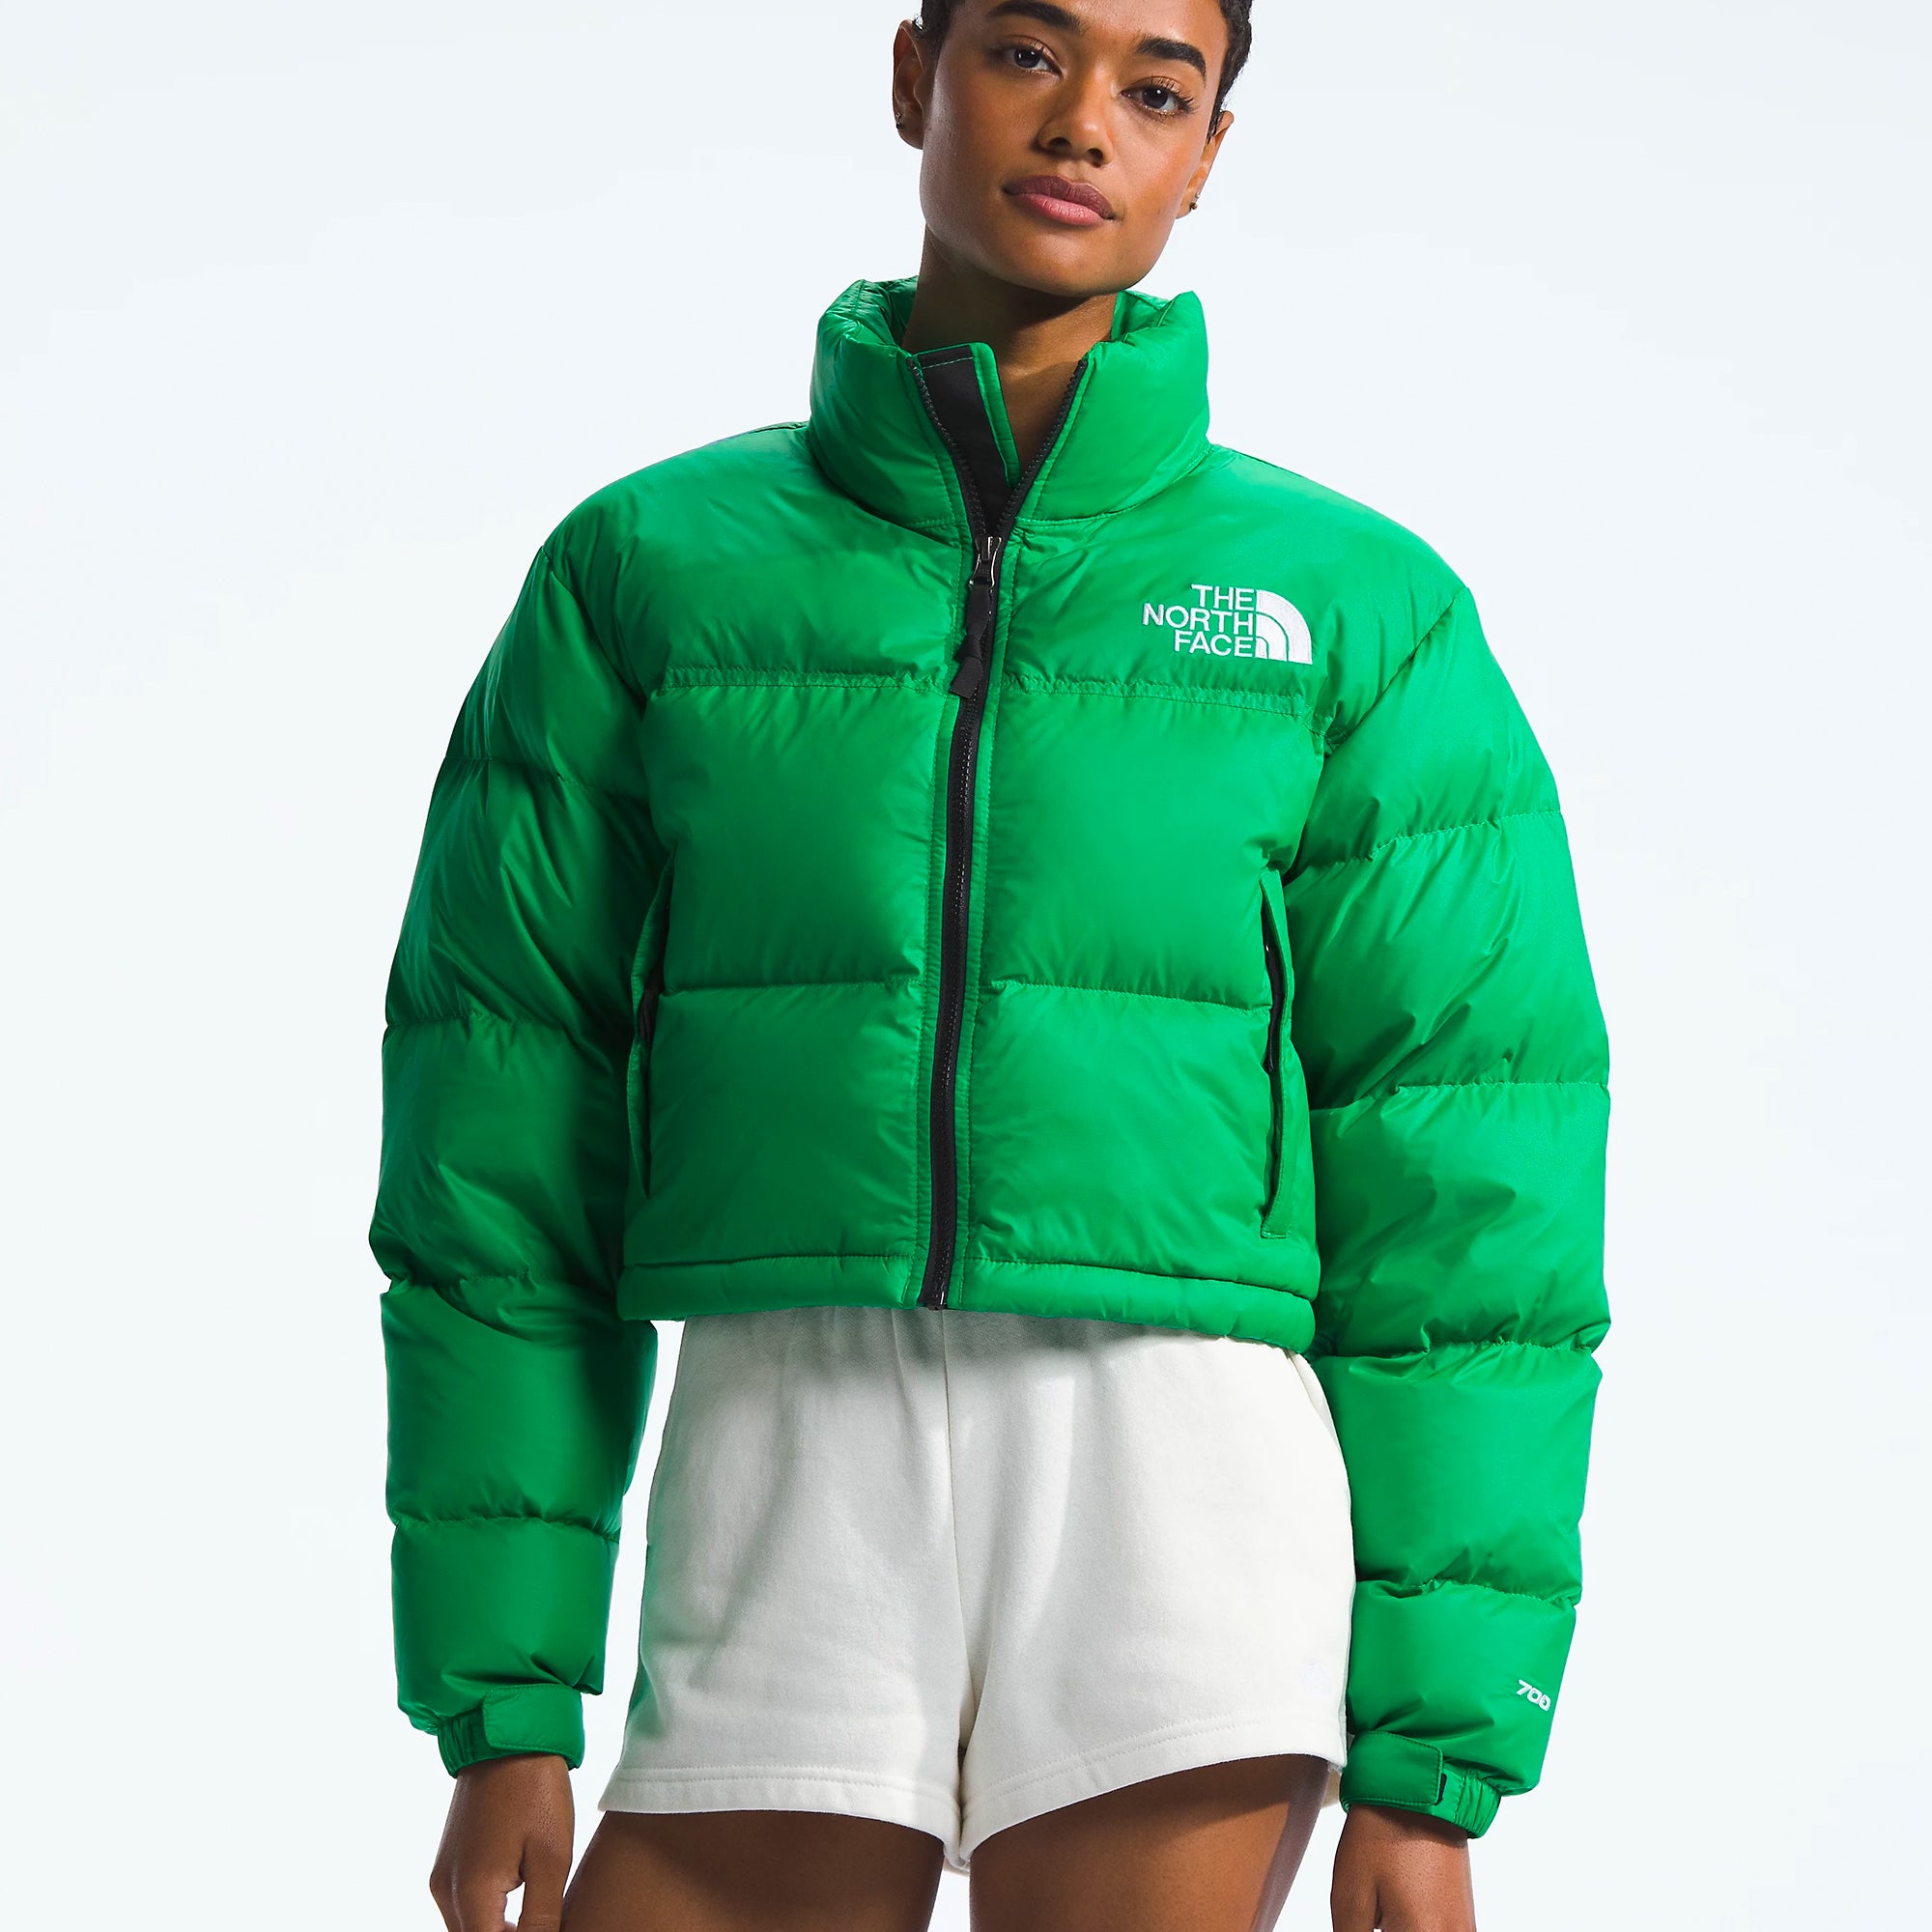 Shop The North Face at Extra Butter